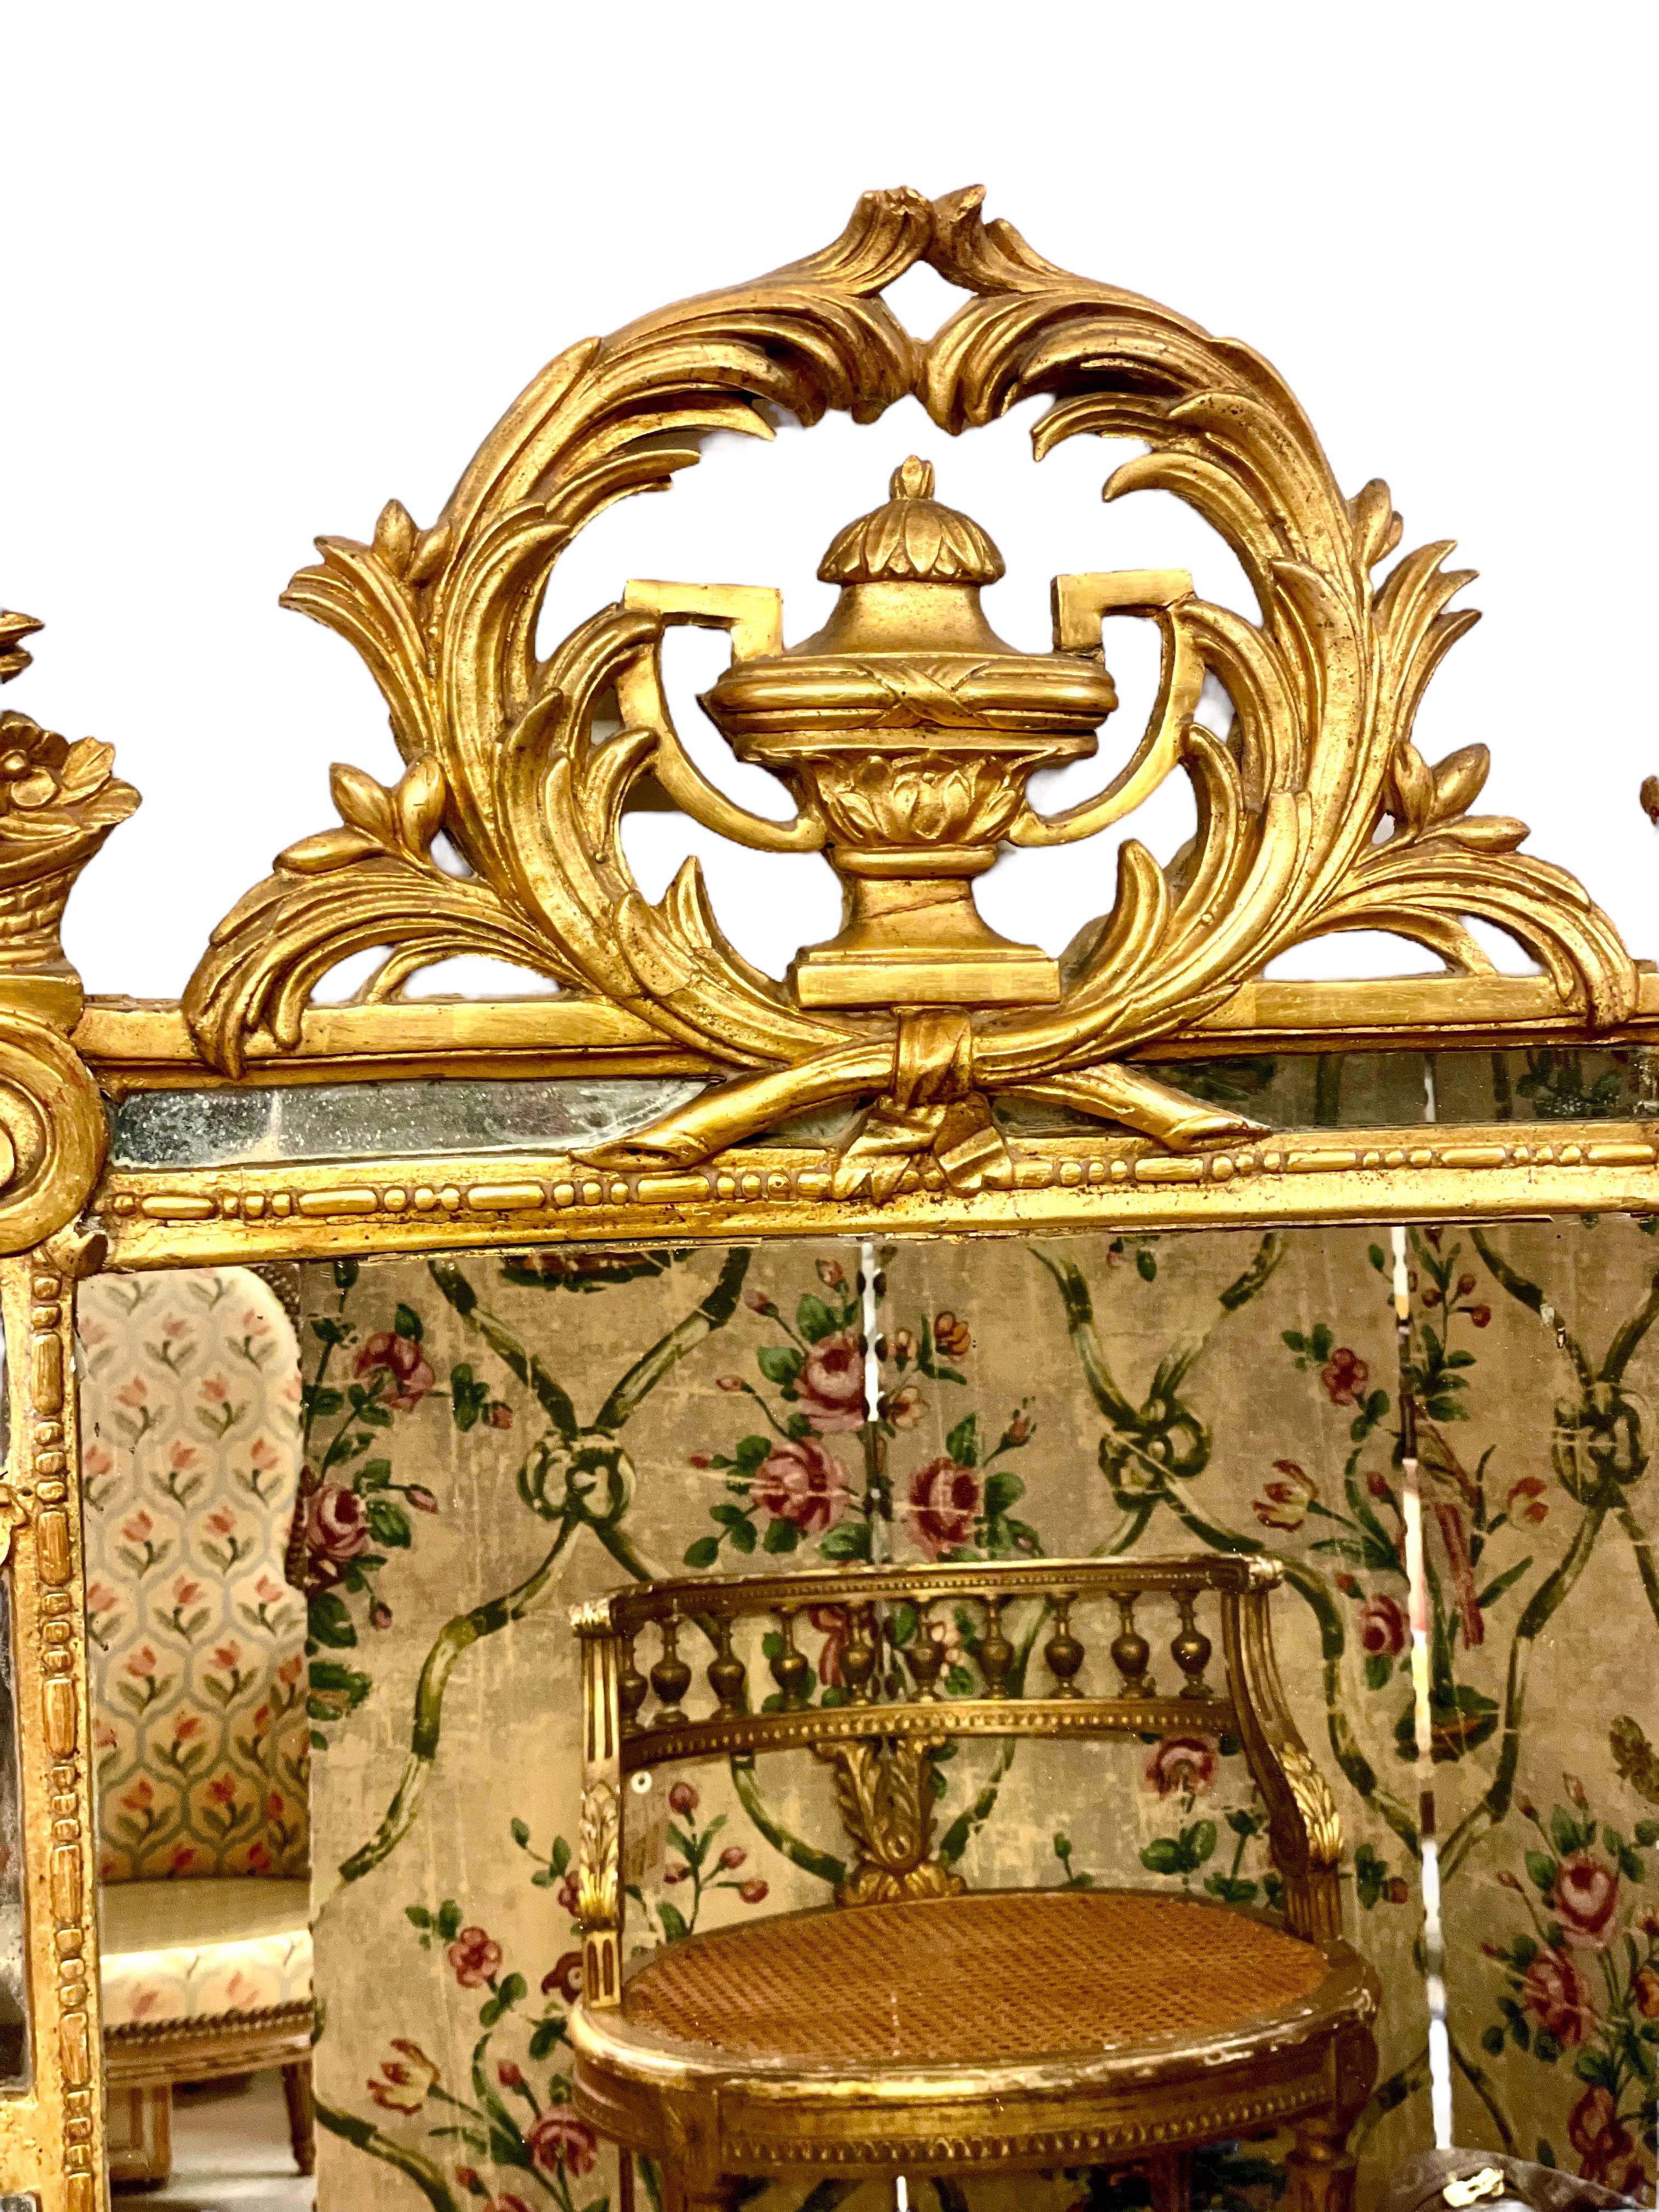 A truly exceptional late 18th century French Louis XVI parclose, or cushion, mirror, in an elaborate, richly carved giltwood frame. This rectangular mirror is embellished on all four sides with beautifully hand-carved classical designs, including